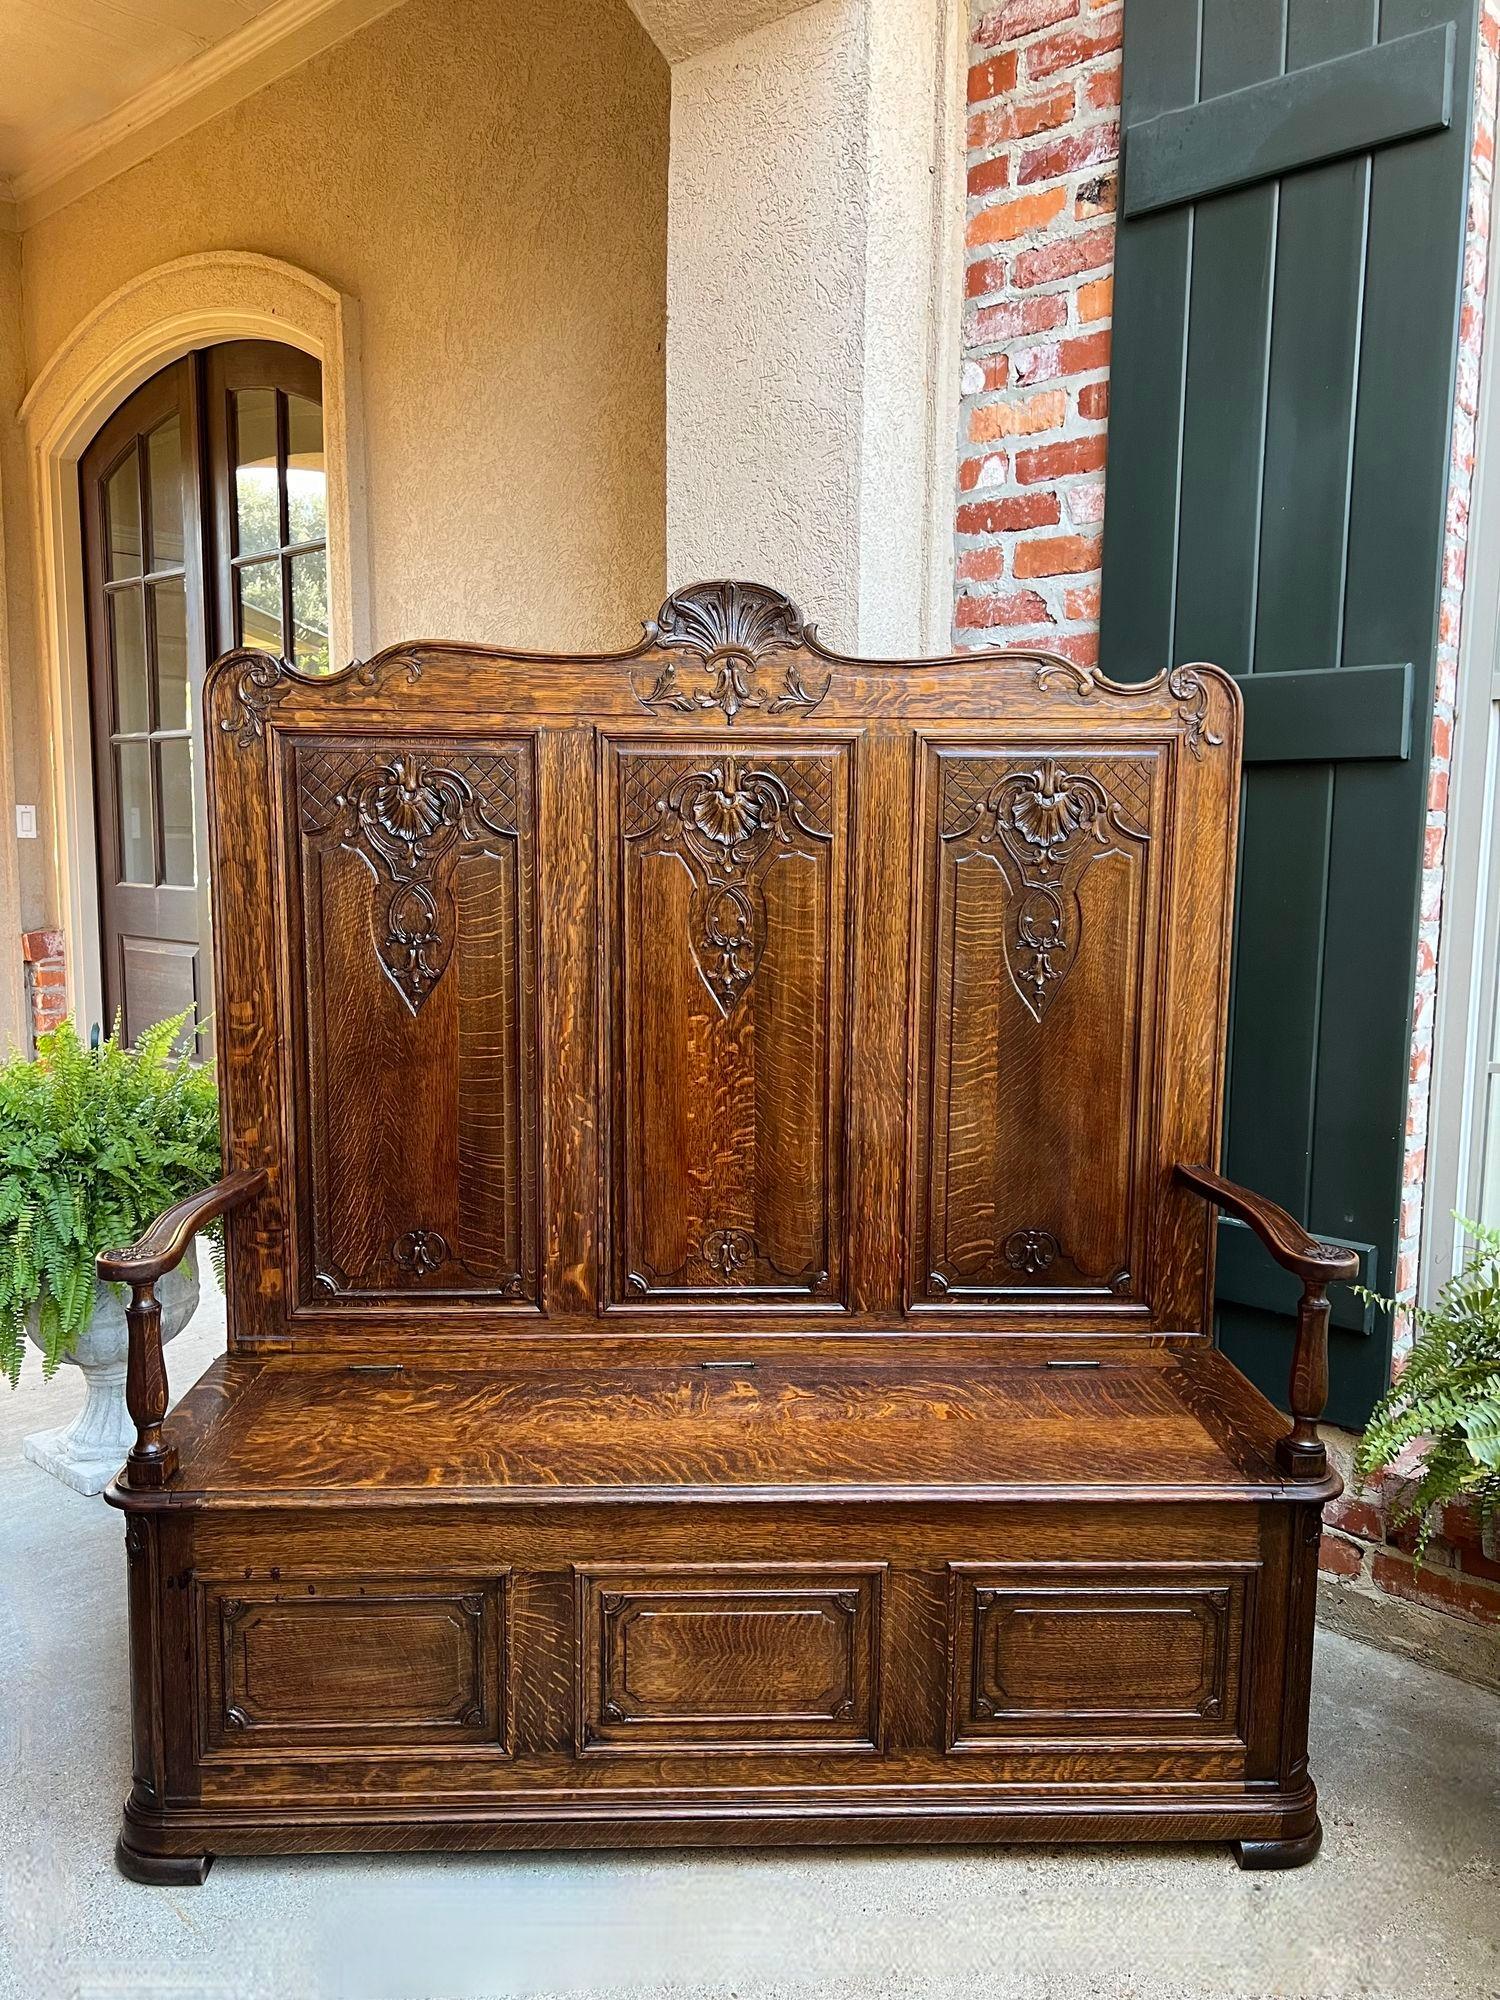 TALL Antique French Louis XV Bench Settle Pew Carved Tiger Oak Chest Foyer Entry Piece.

Direct from France, a stunning antique French hall bench with superb carvings and a majestic 5 ft. height!
Louis XV design throughout, with carved shell center